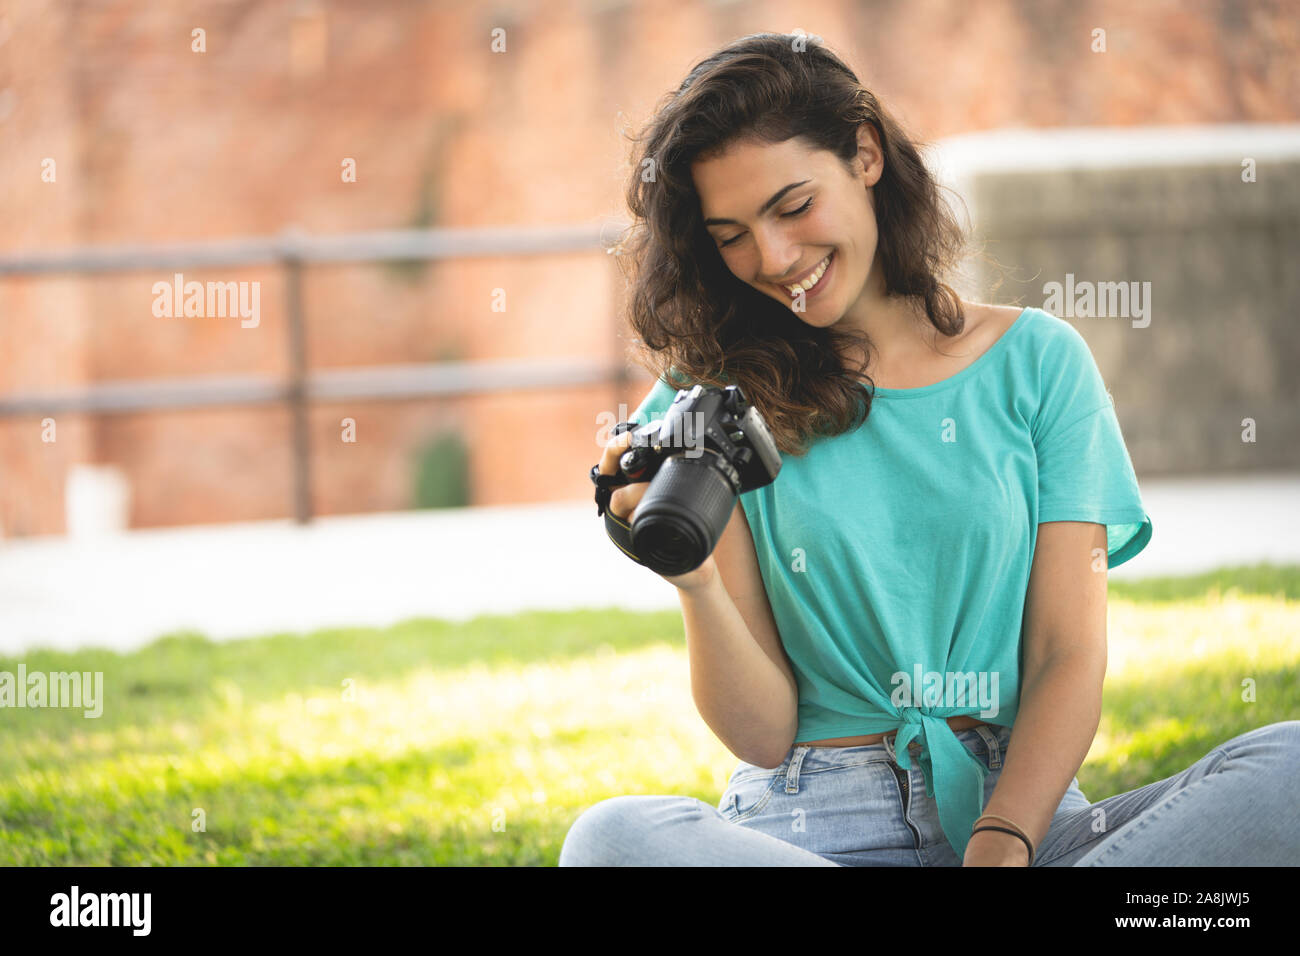 Photographer girl sitting on the grass looking at the camera screen, smiling Stock Photo